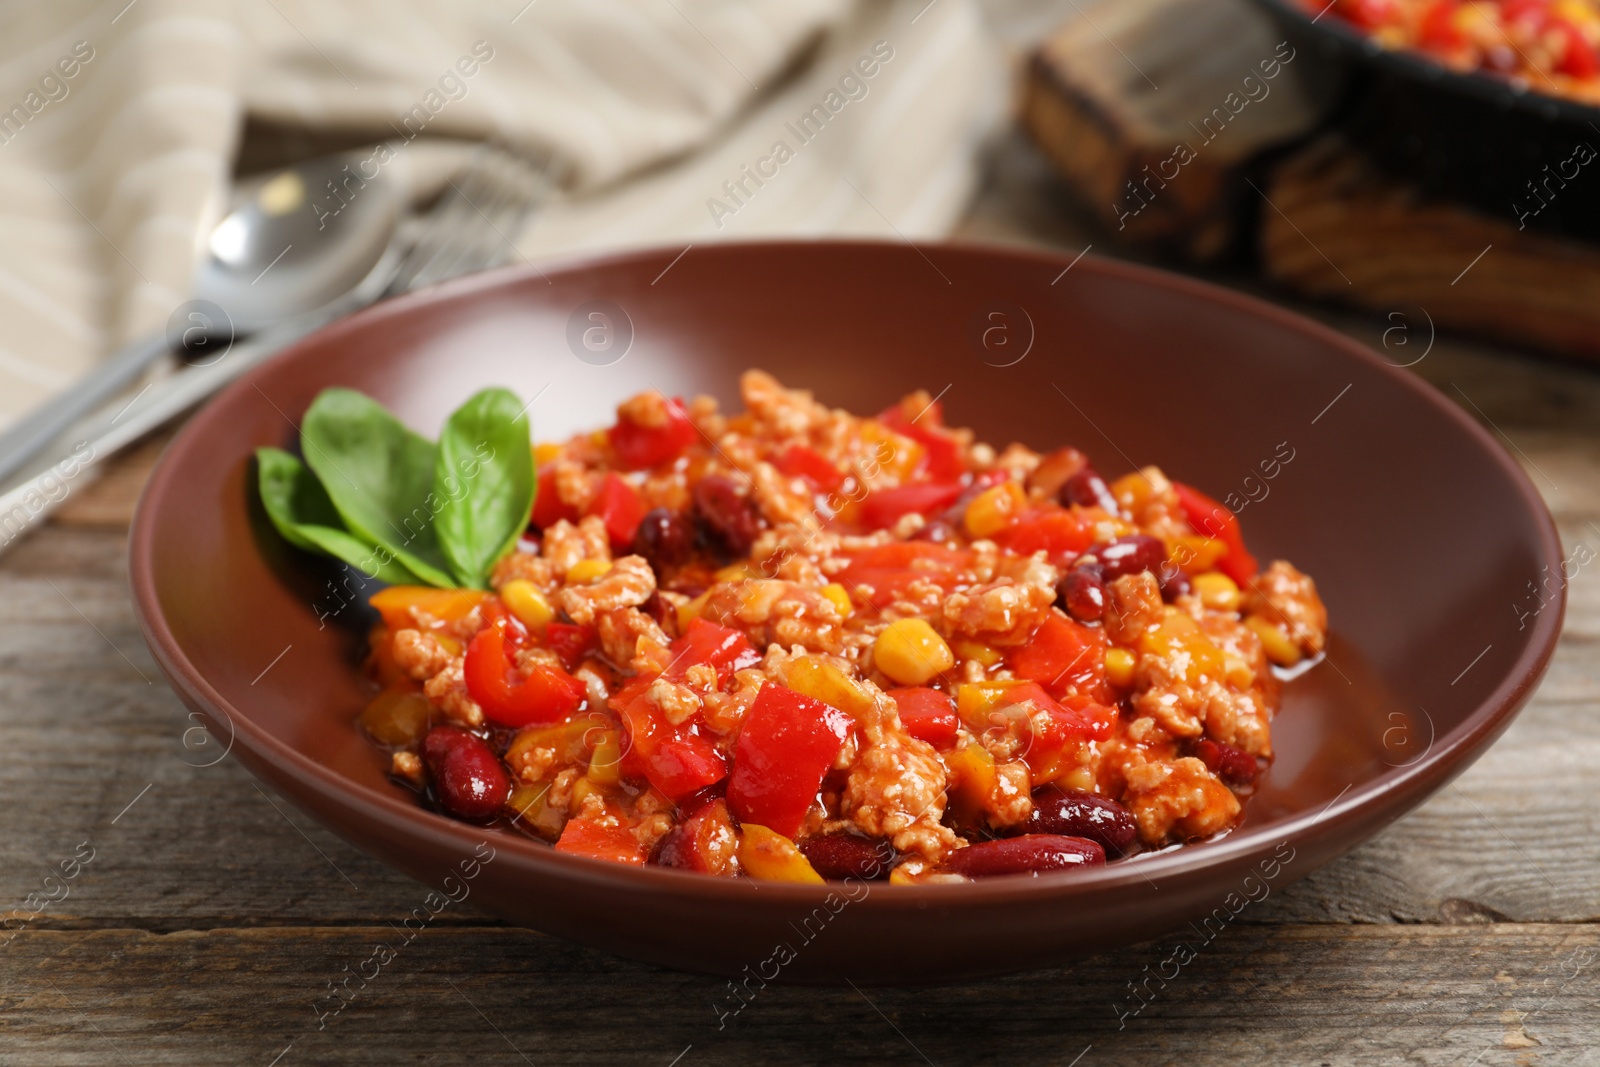 Photo of Plate with chili con carne on table